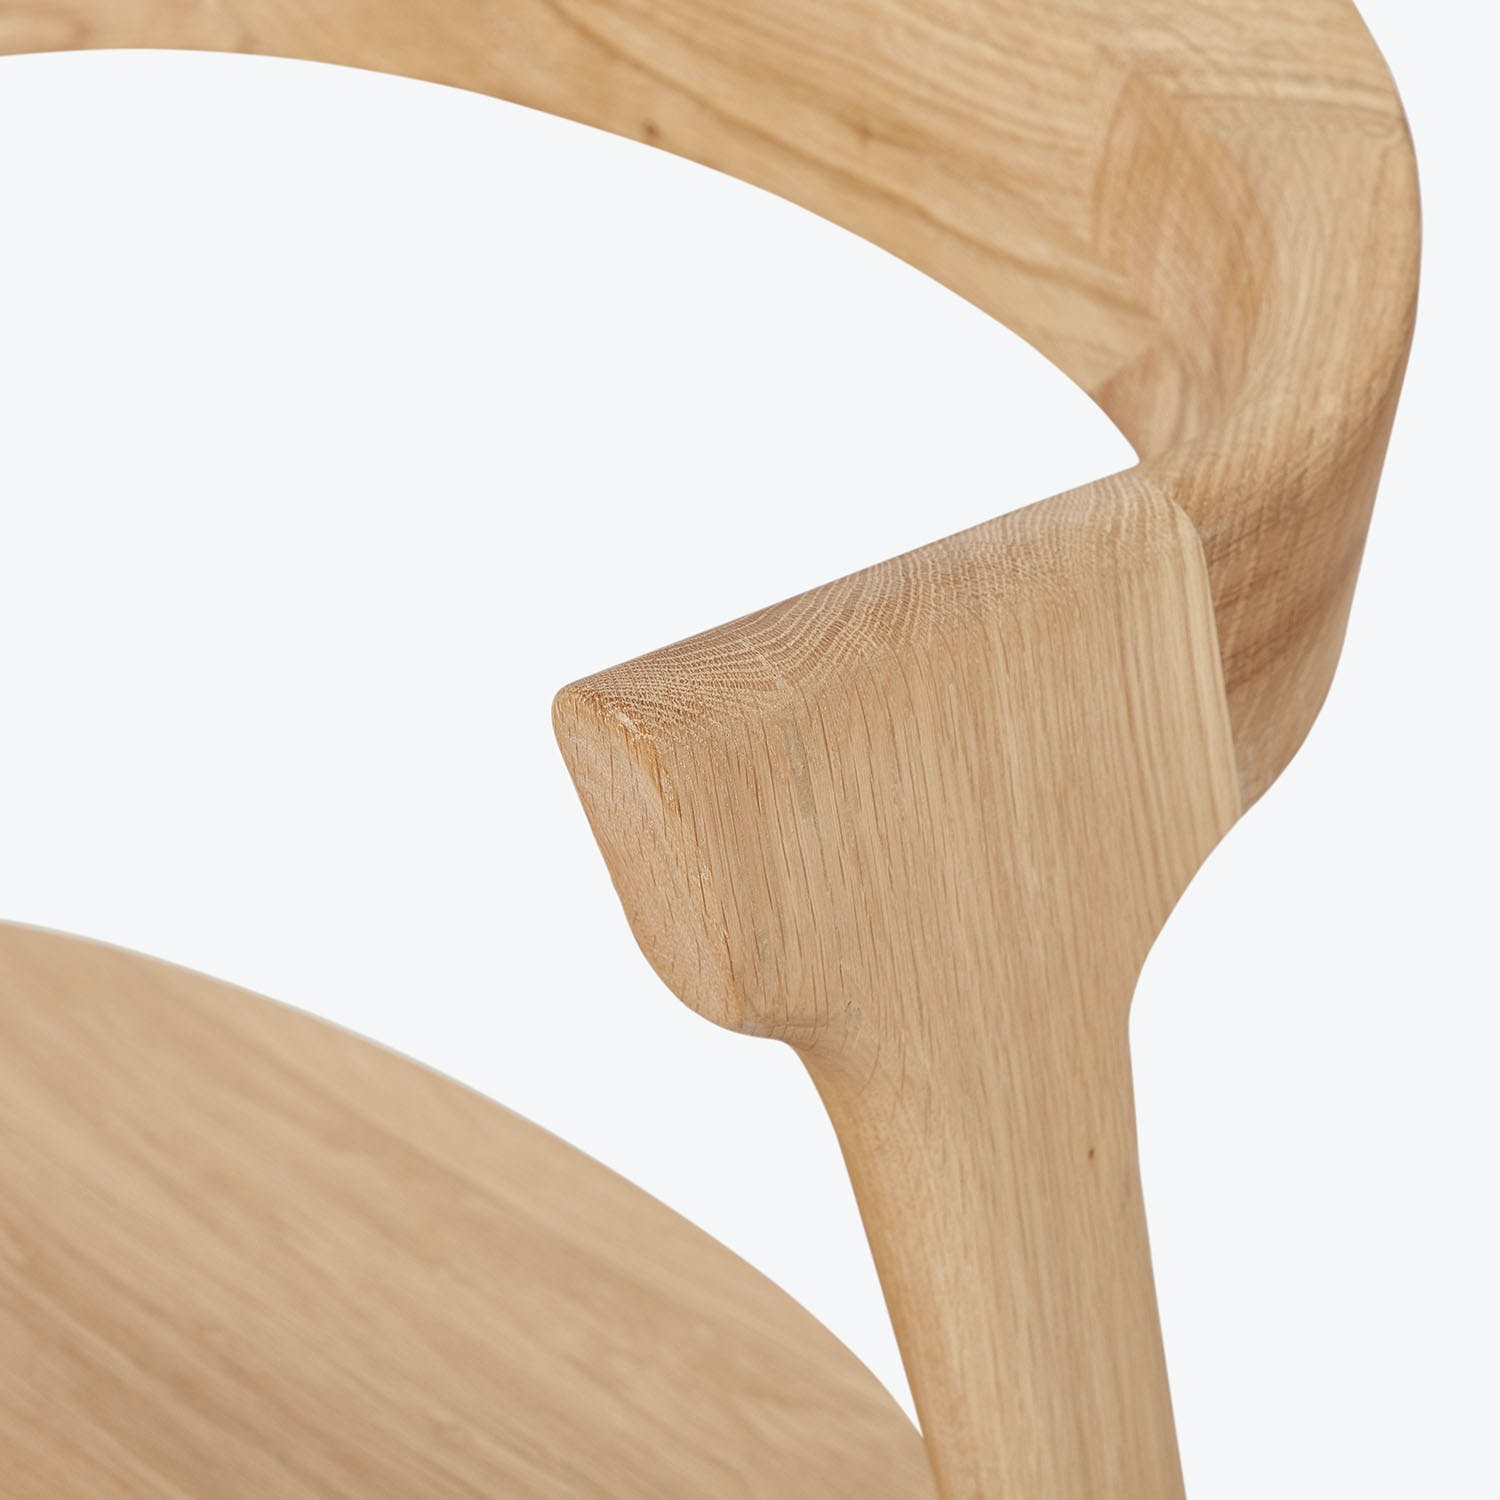 Close-up of a finely crafted wooden chair detail with seamless joinery.